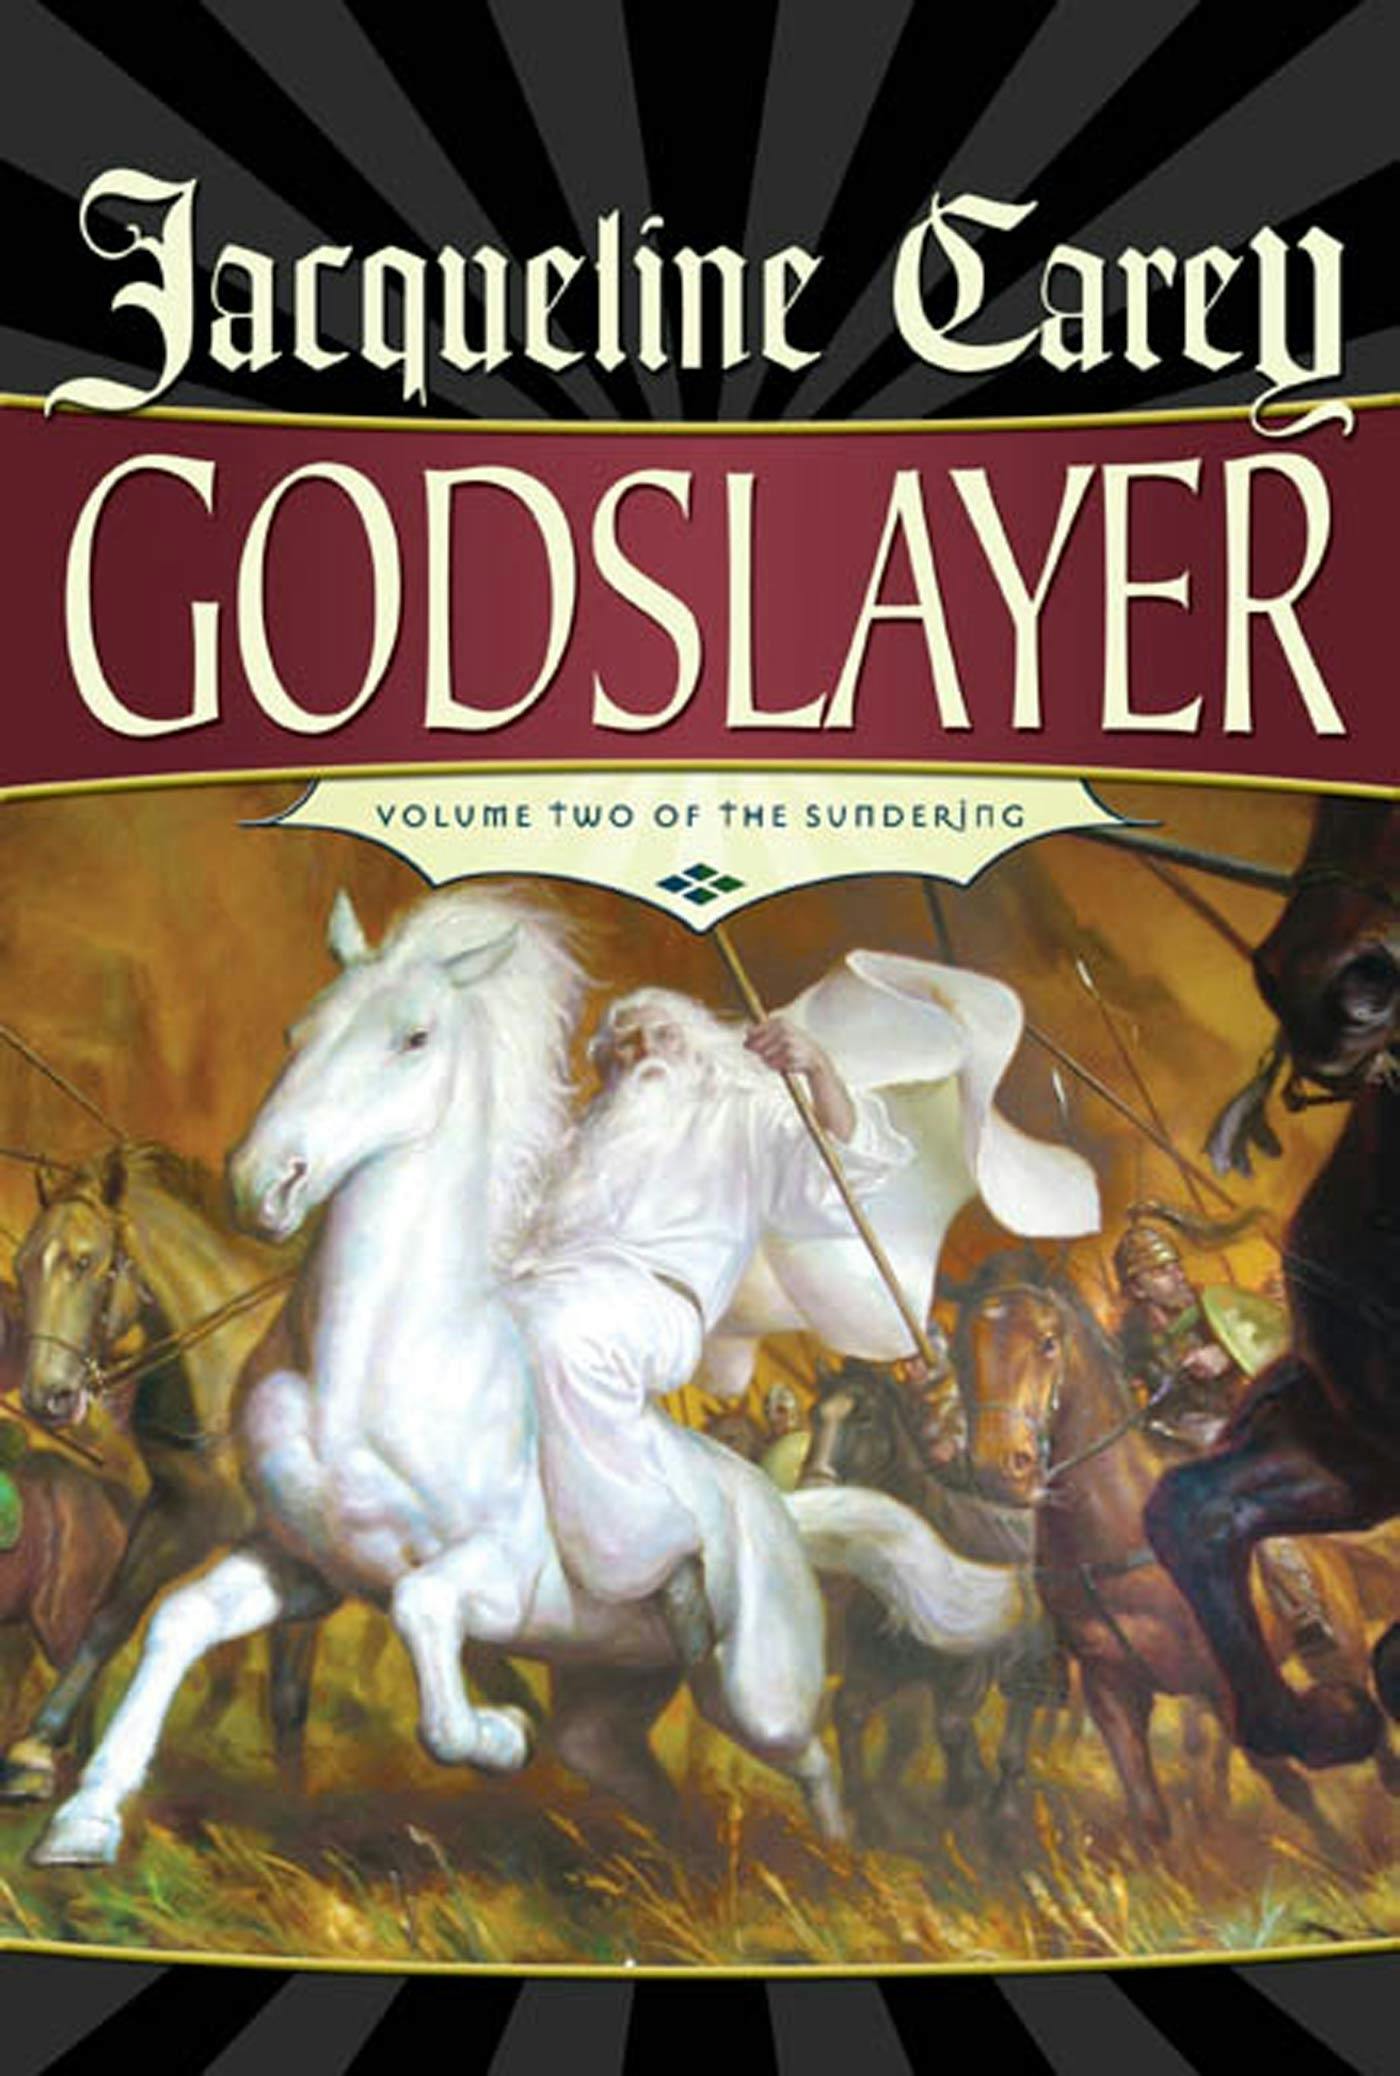 Cover for the book titled as: Godslayer